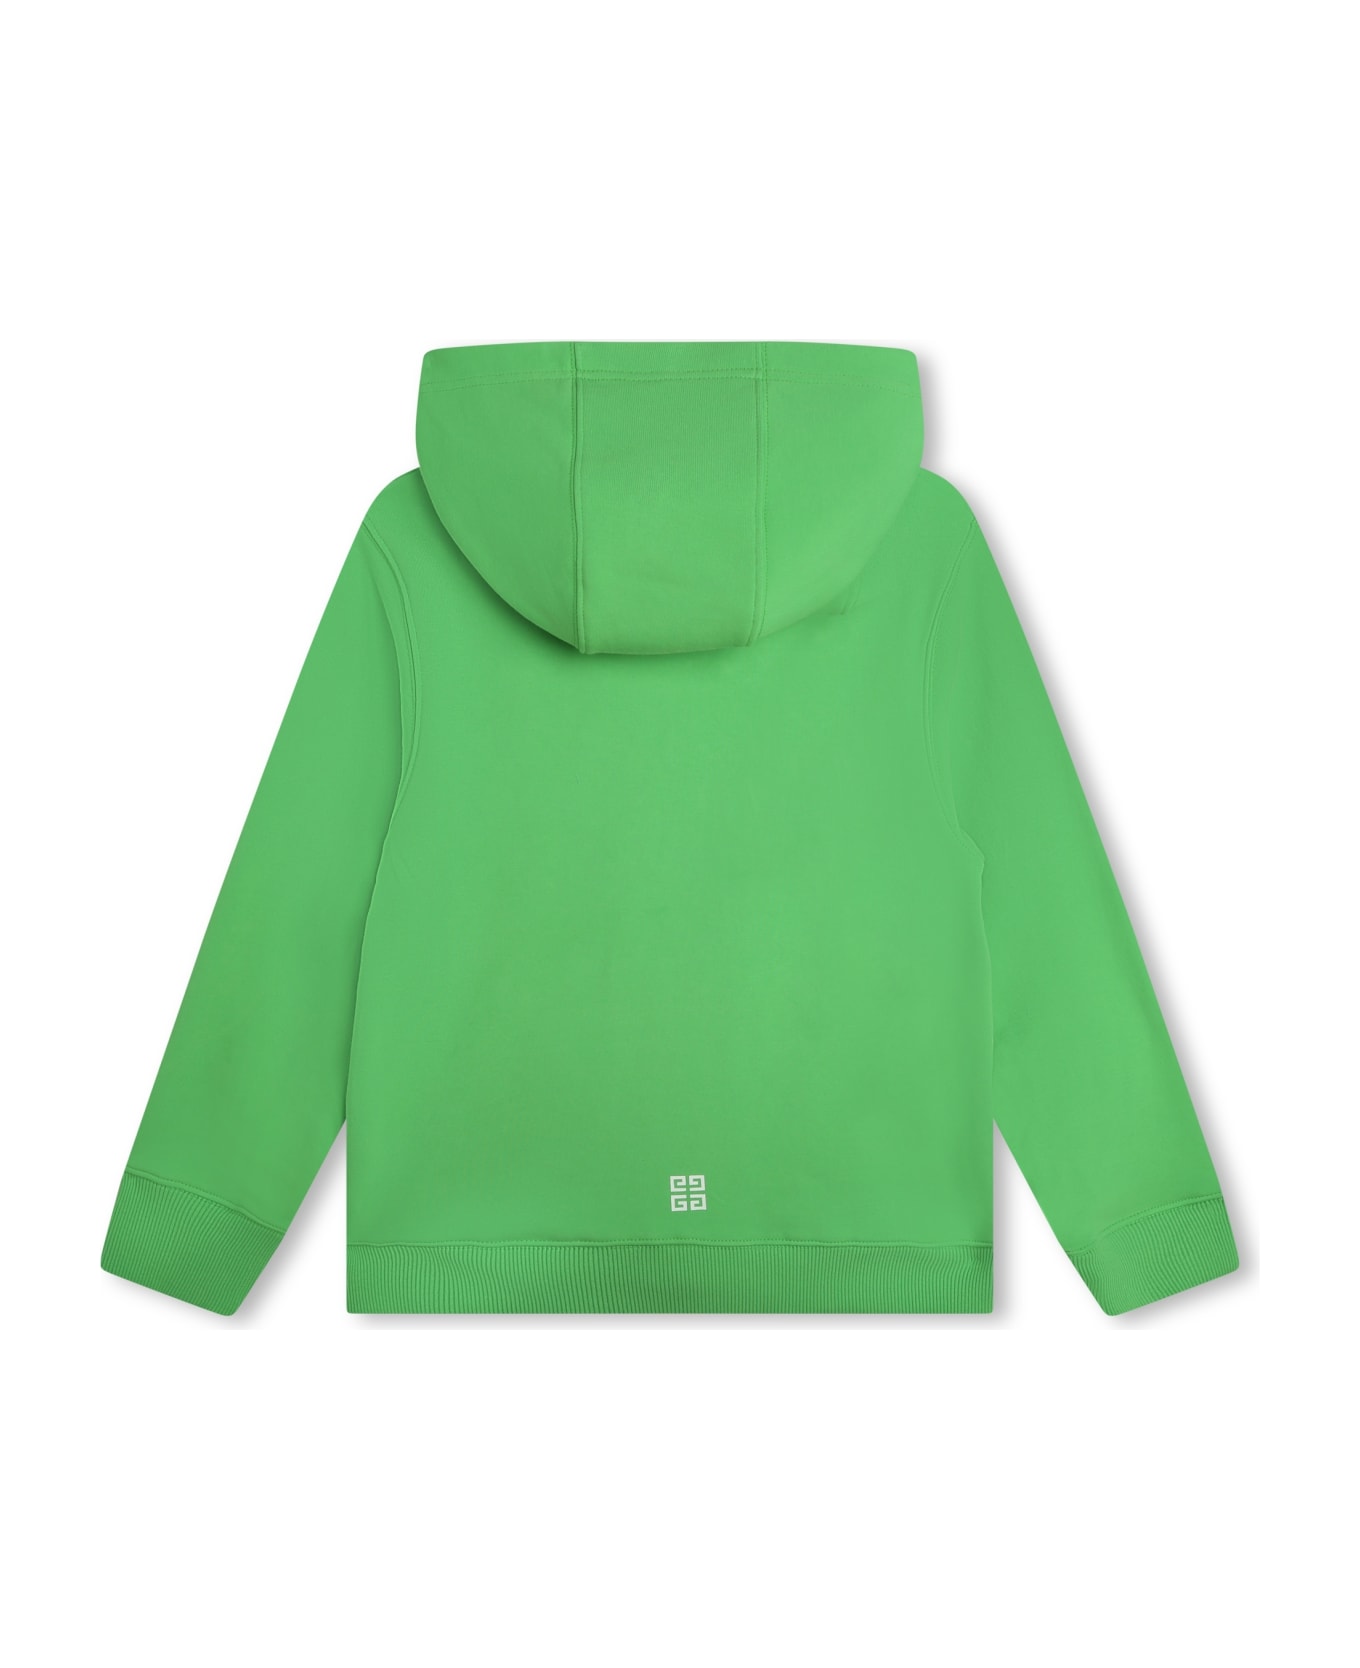 Givenchy Sweatshirt With Print - F Verde Lampeggiante